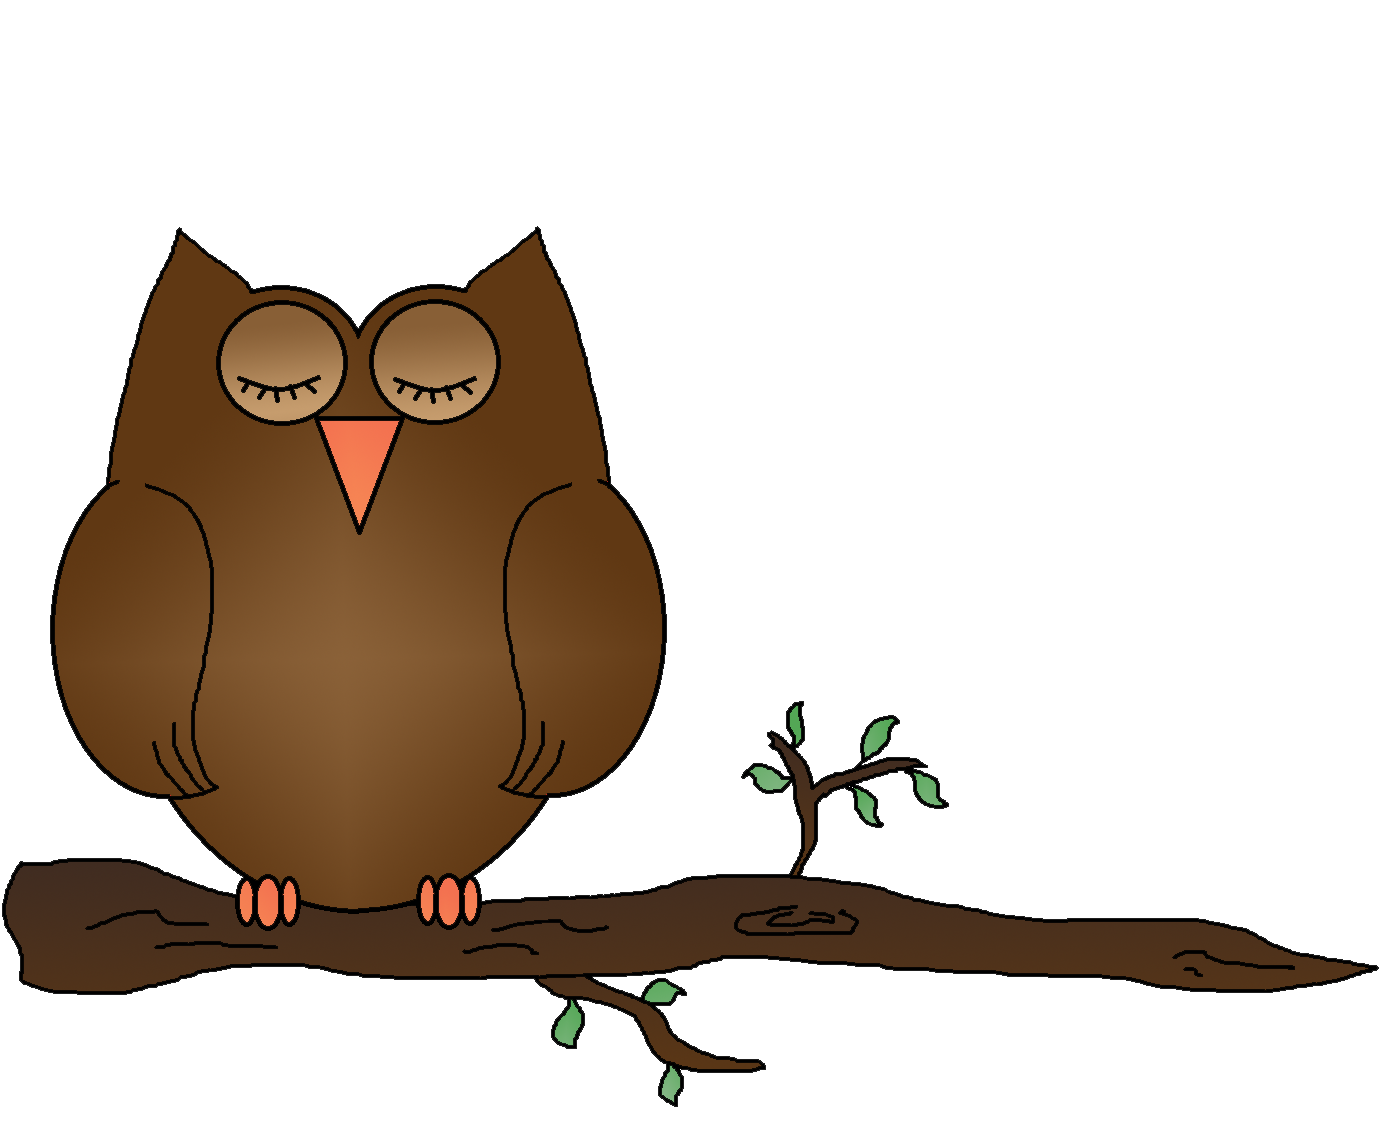 Owl for kids at. Owls clipart sleeping